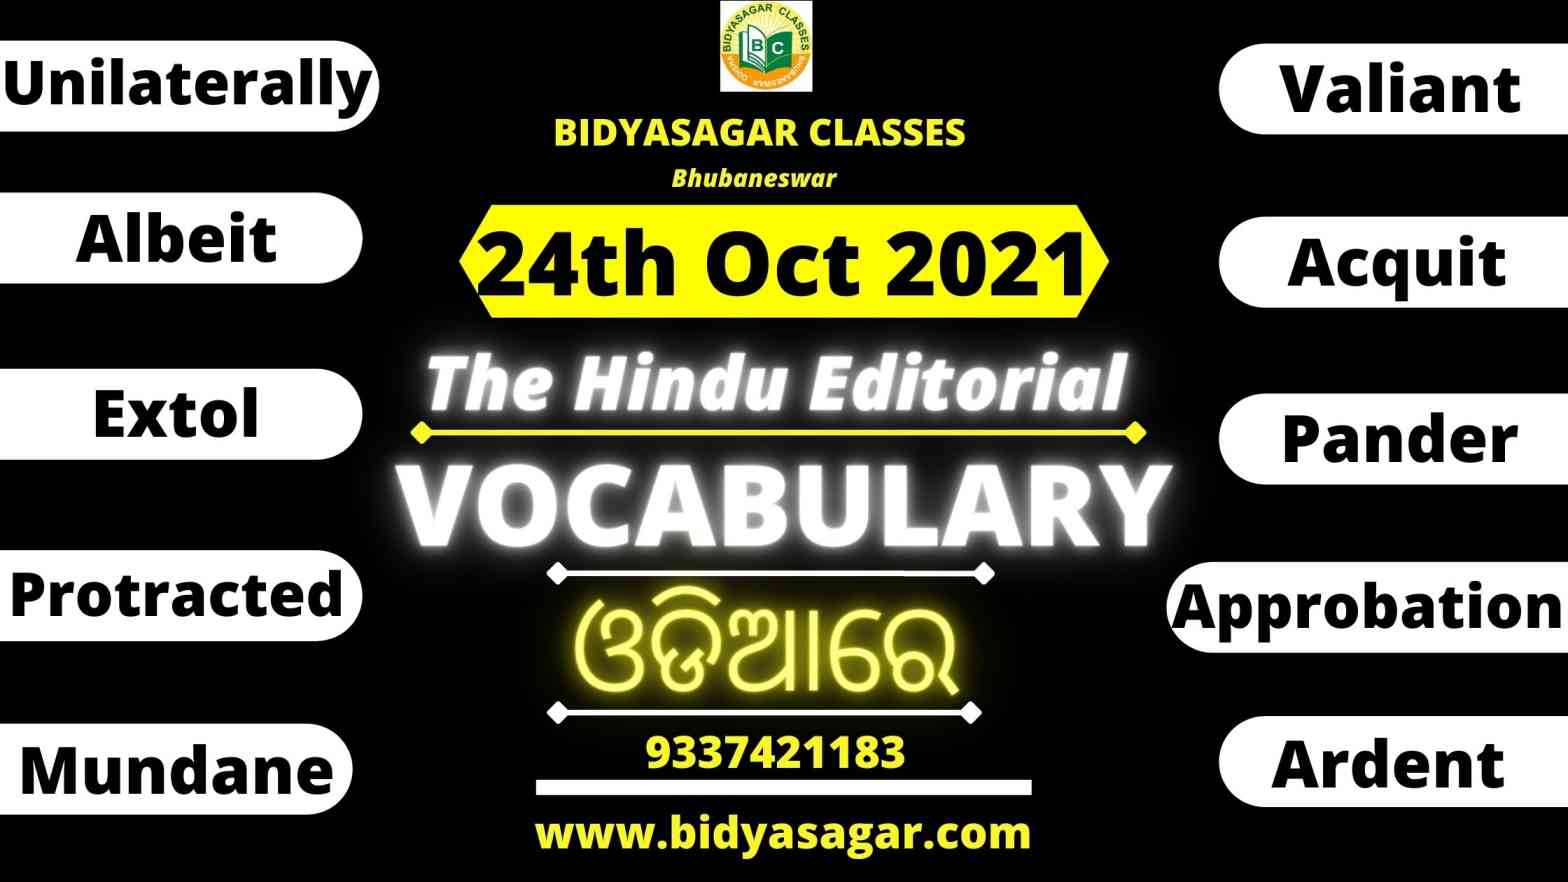 The Hindu Editorial Vocabulary of 24th October 2021